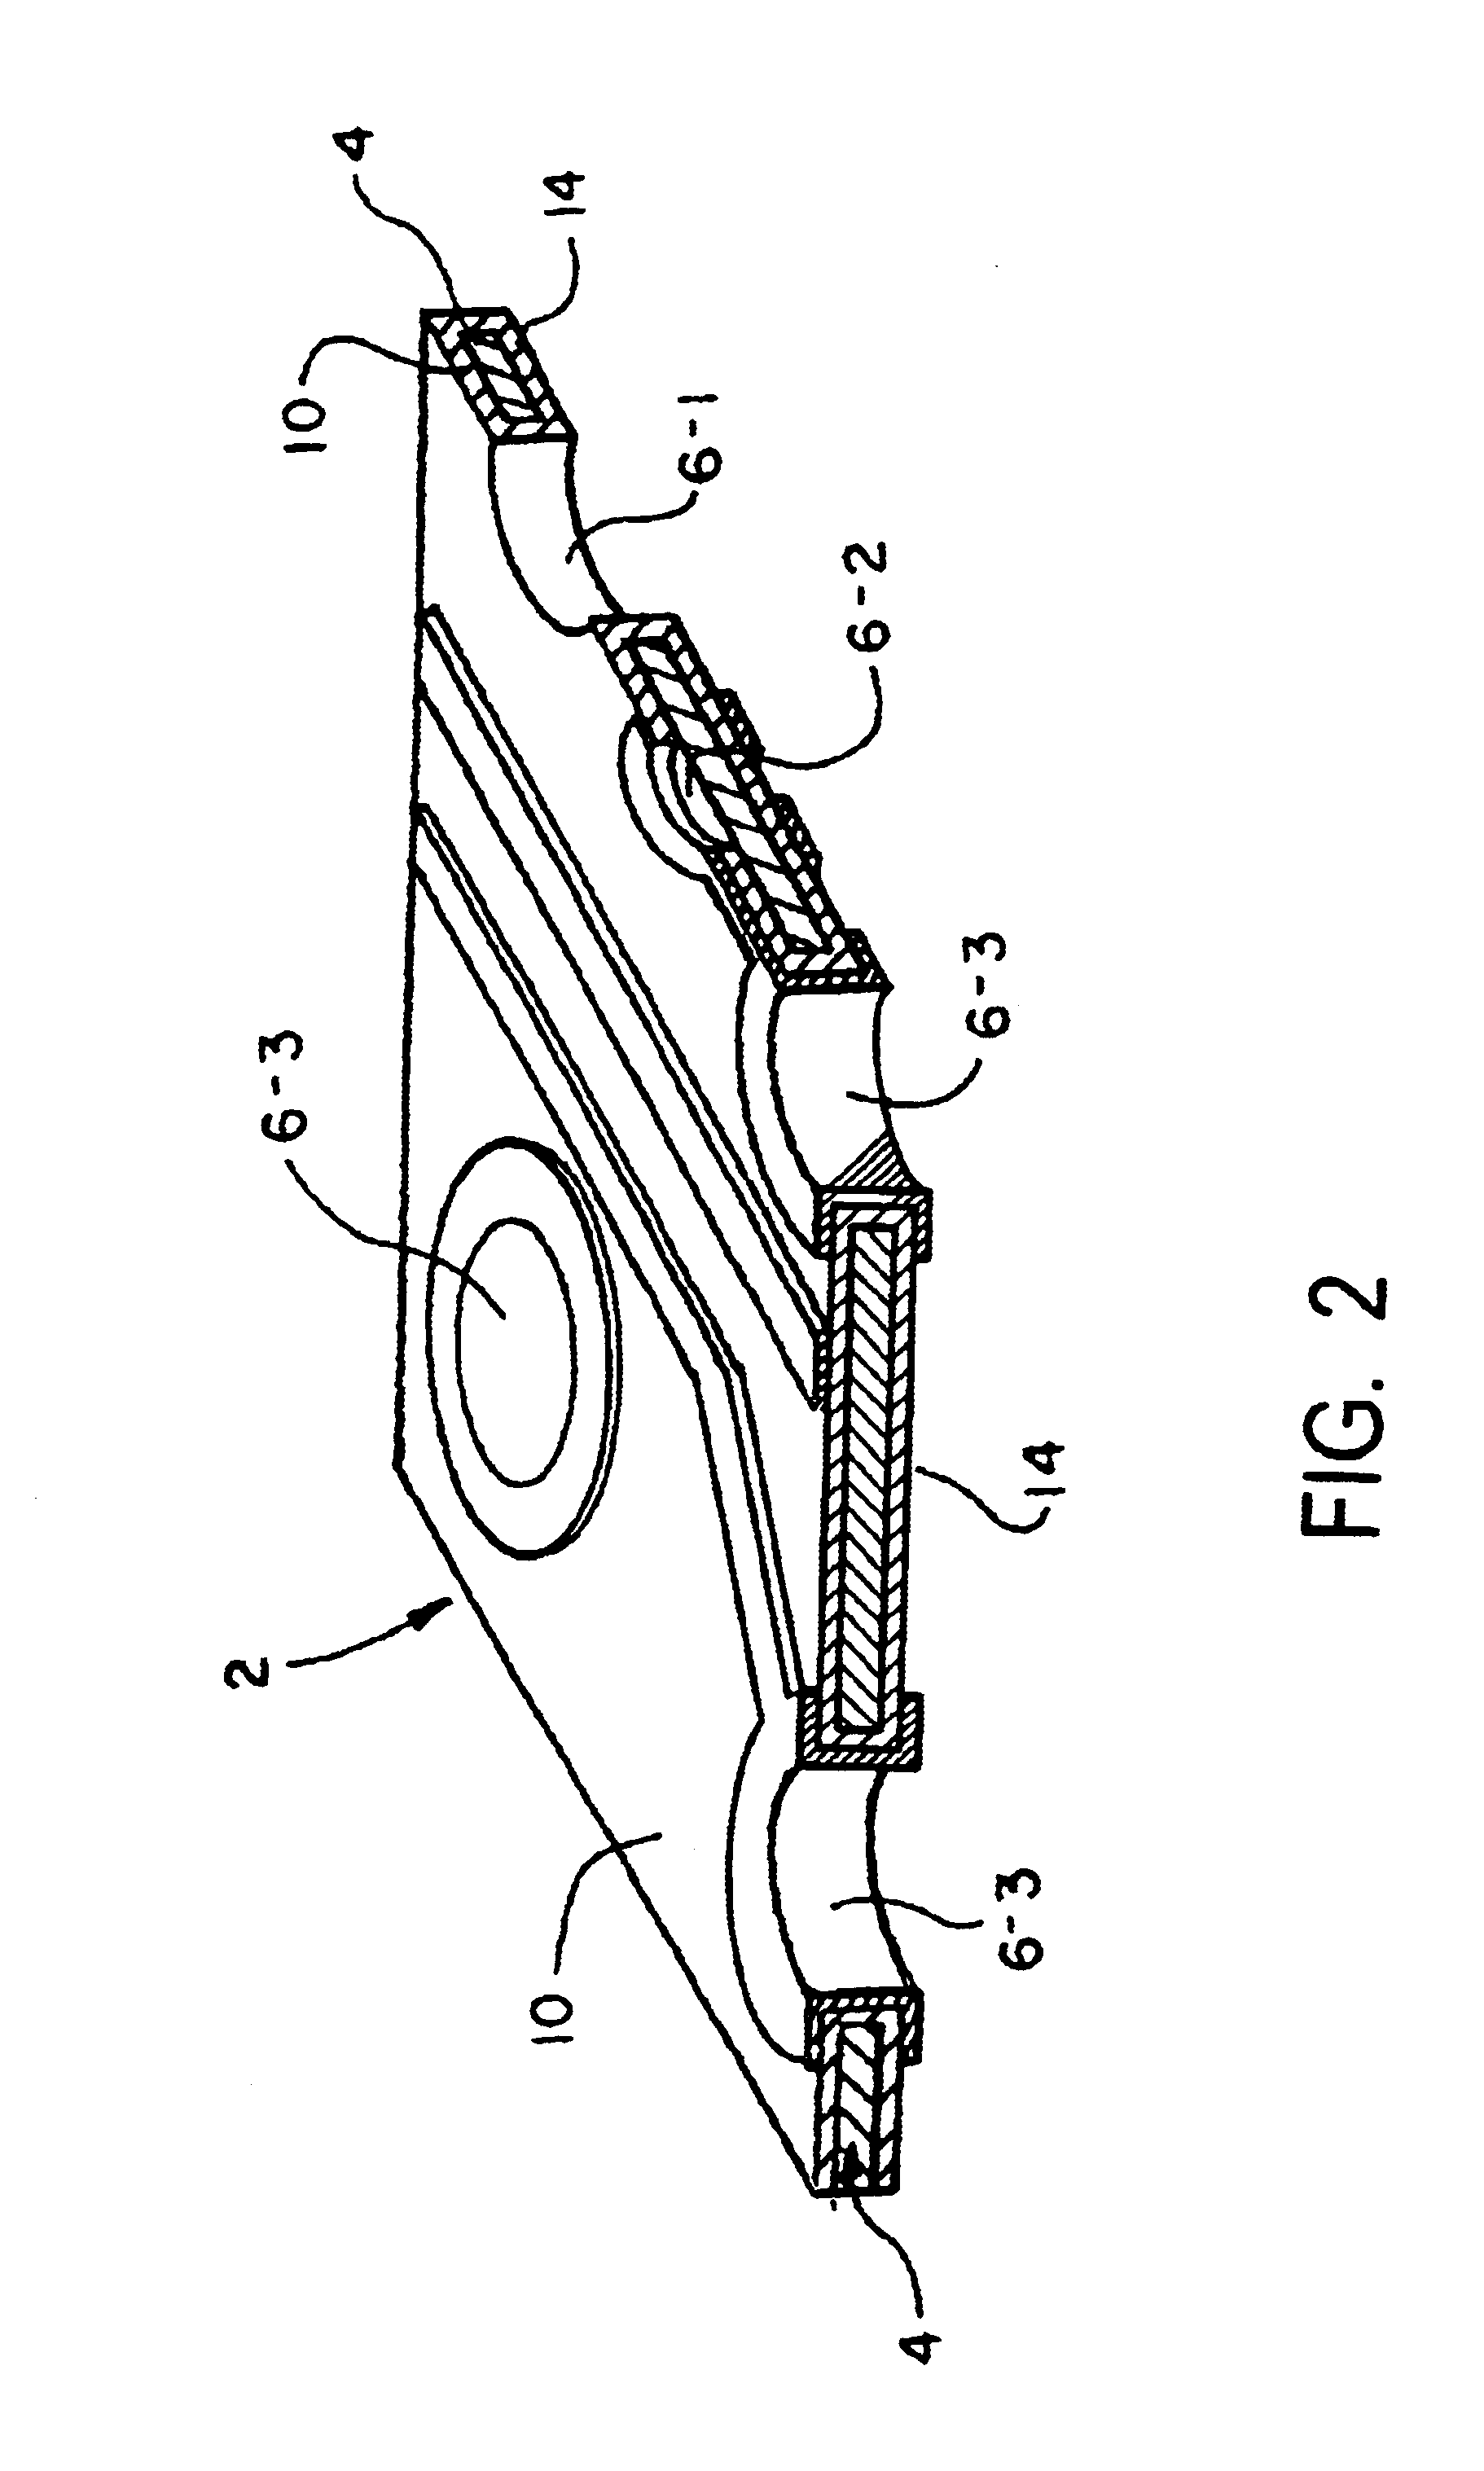 Single or multi-layer printed circuit board with recessed or extended breakaway tabs and method of manufacture thereof